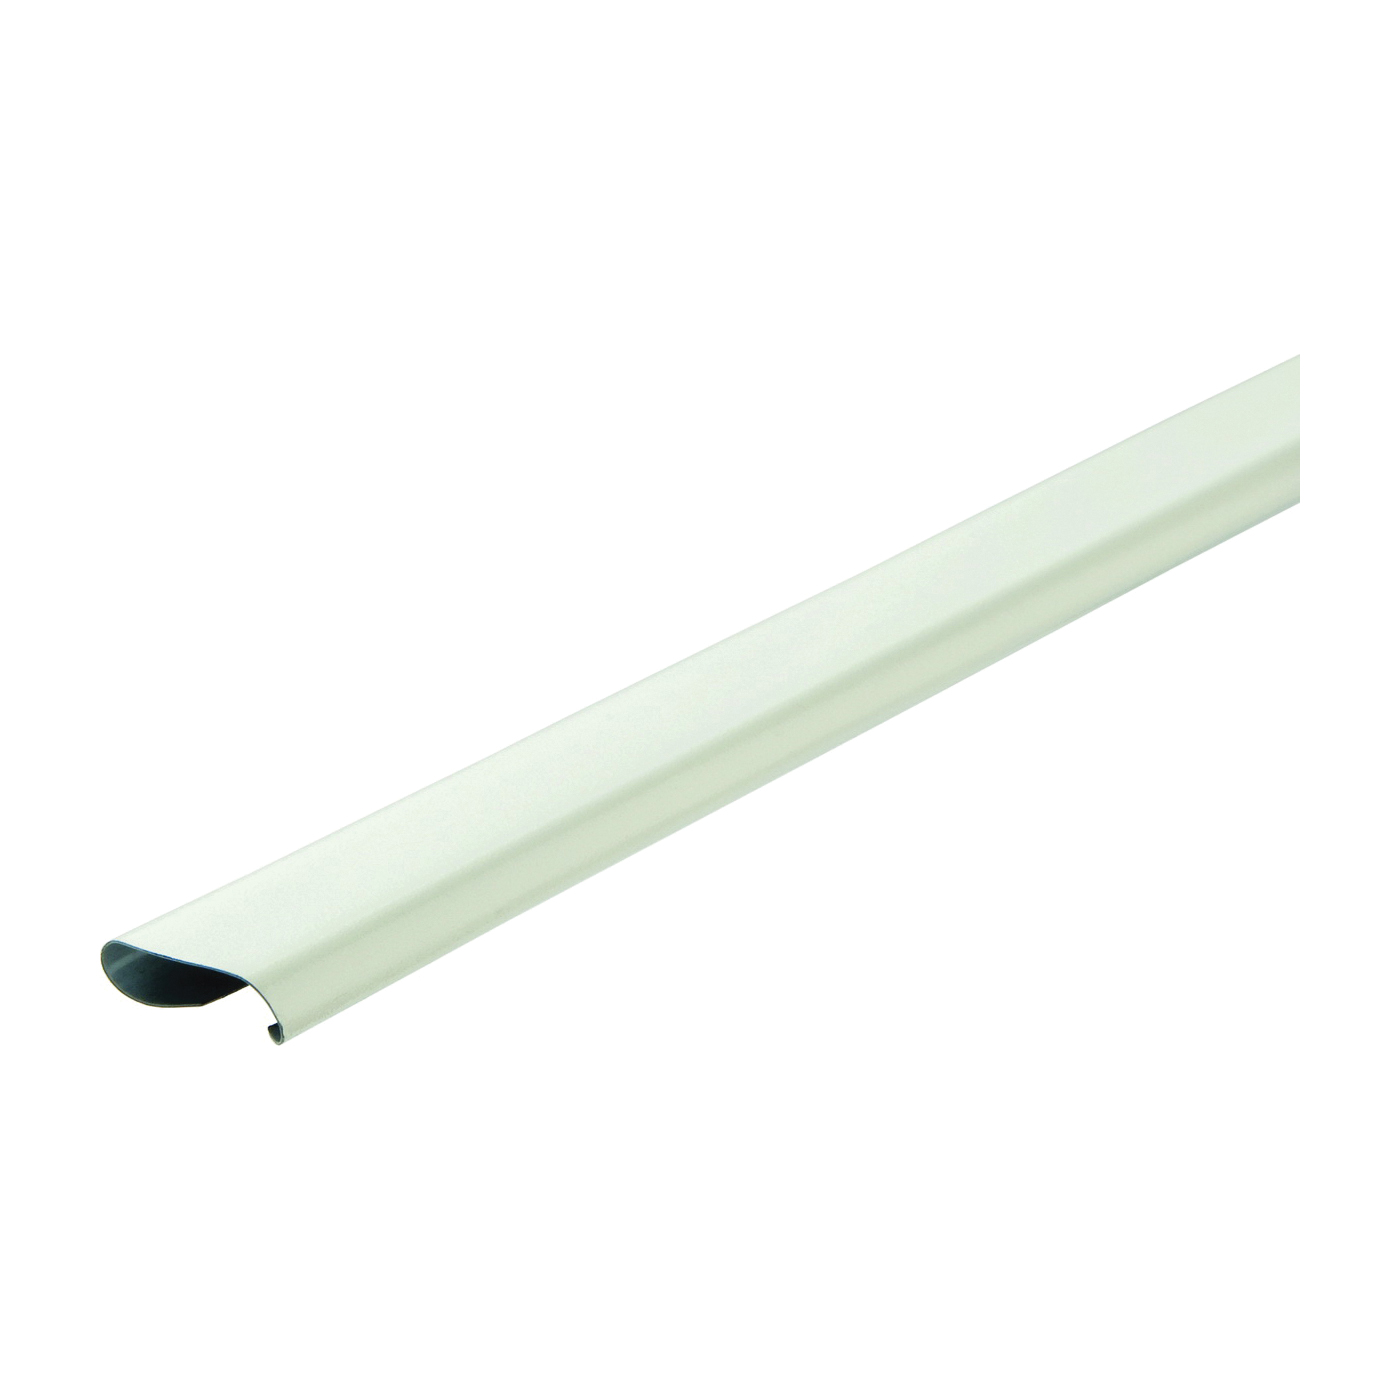 Kenney KN549 Curtain Rod Extender, 27 in L, White - 1